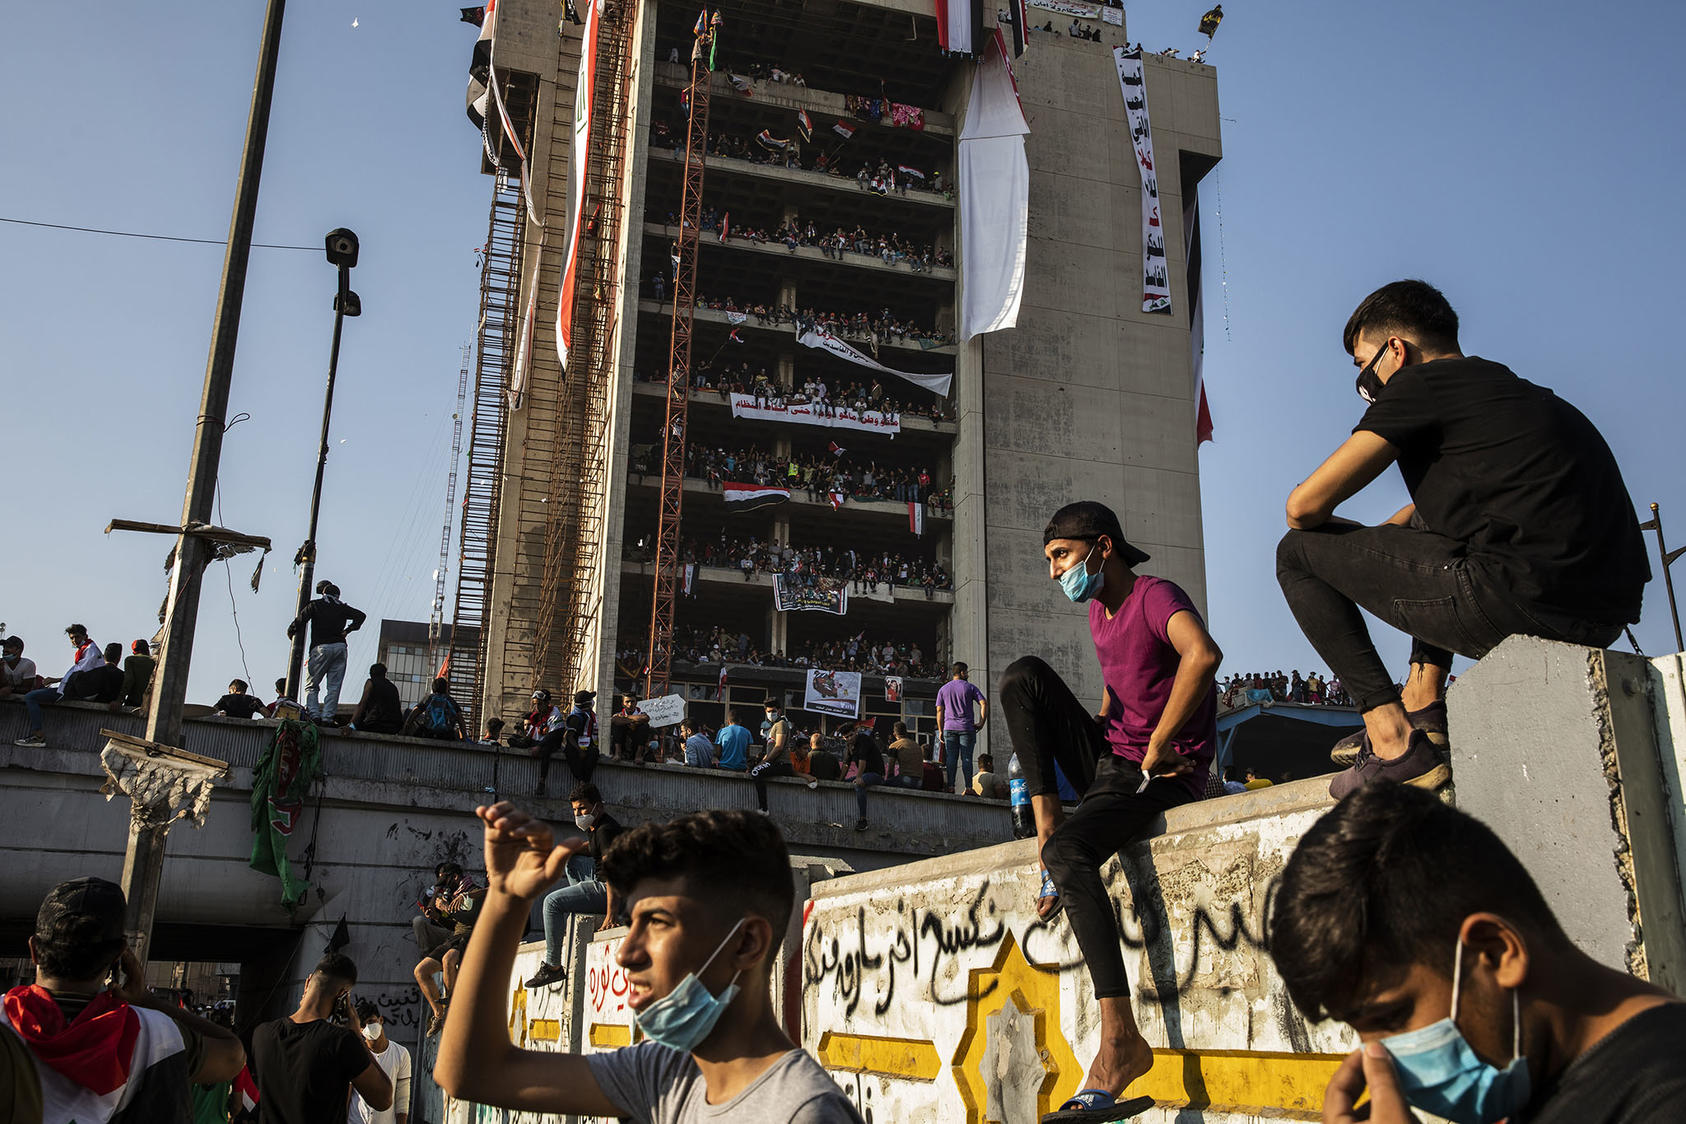 Thousands of people flood Tahrir Square in Baghdad for an anti-government protest, Nov. 1, 2019. (Ivor Prickett/The New York Times)